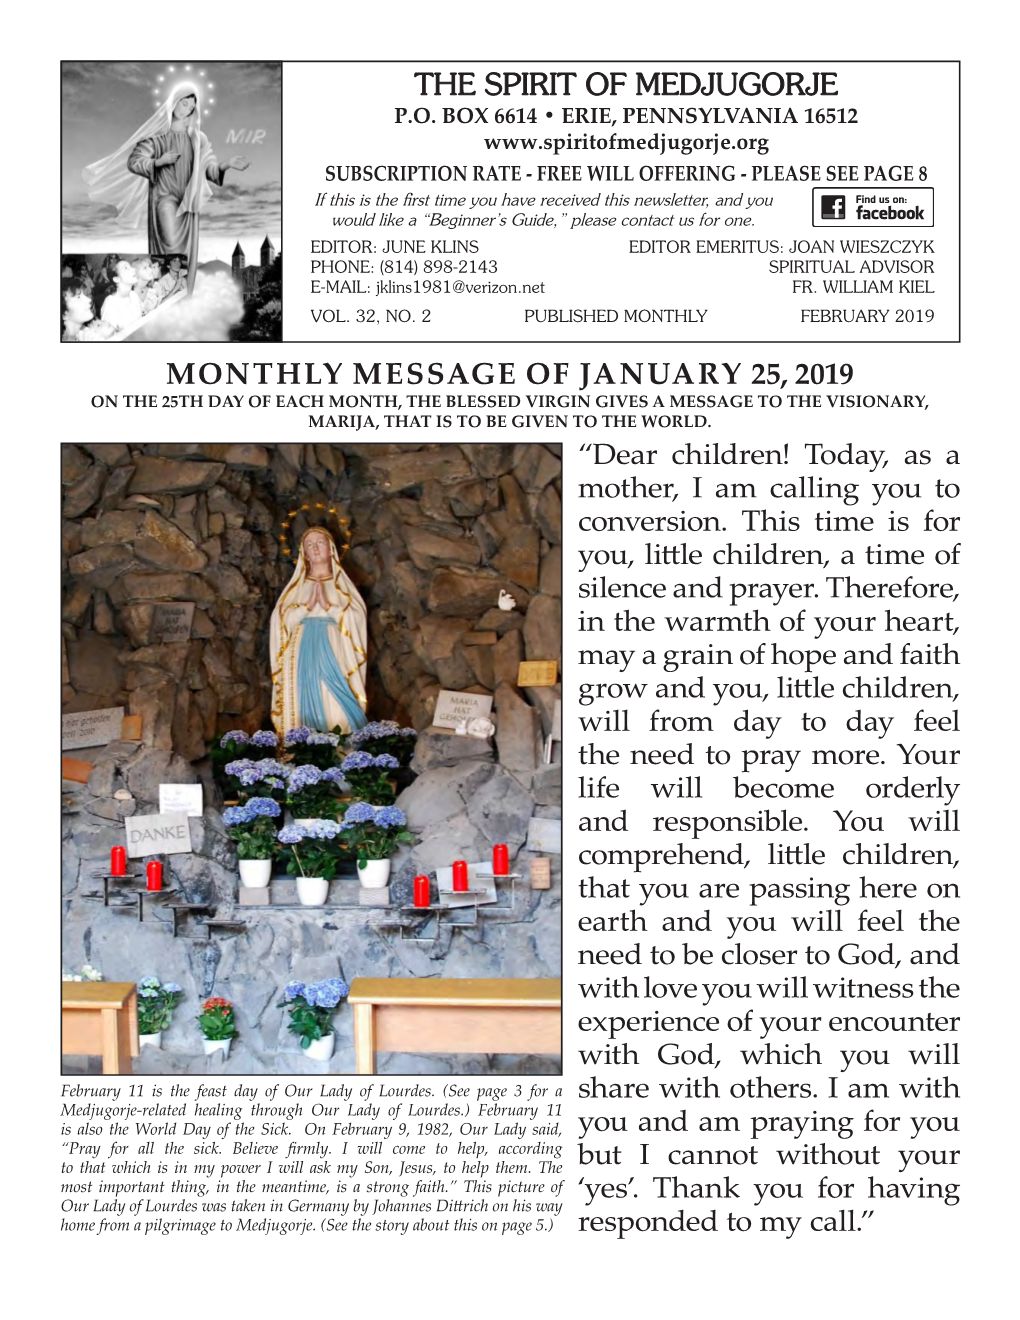 The Spirit of Medjugorje Monthly Message of January 25, 2019